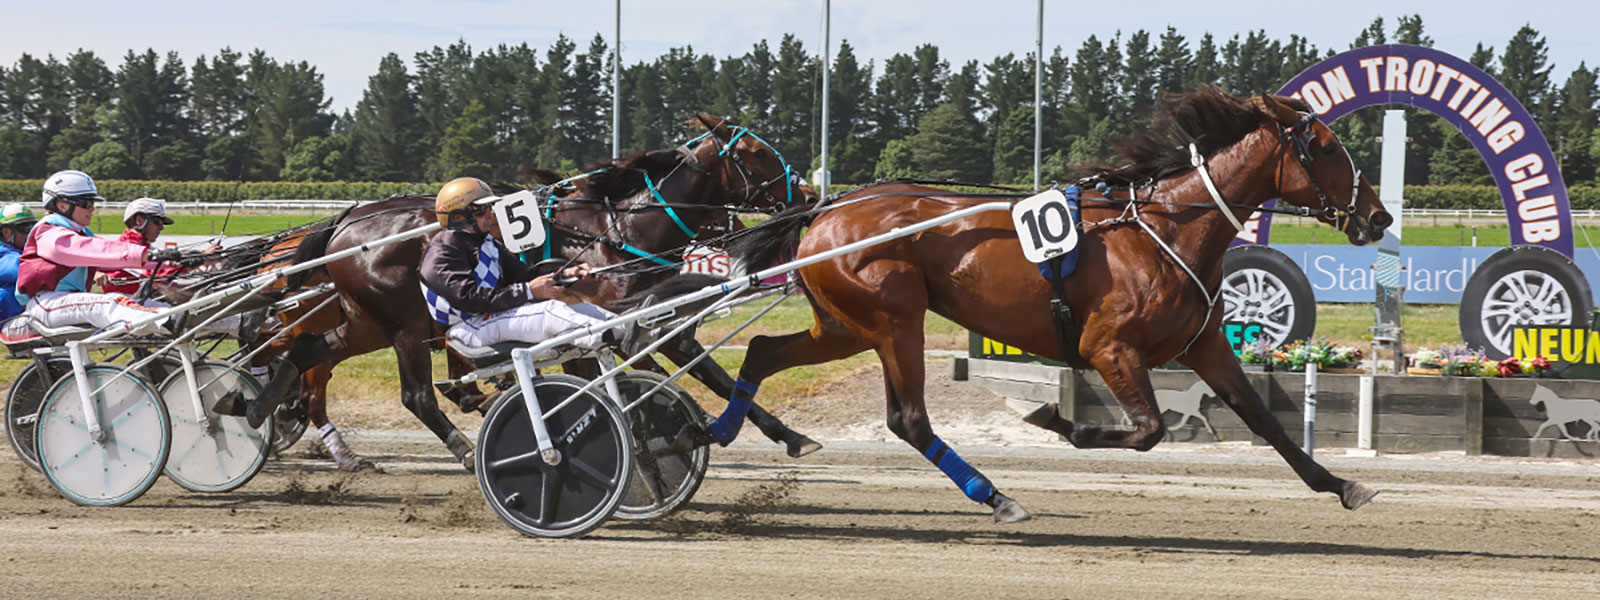 New date for 2YO Trotting feature